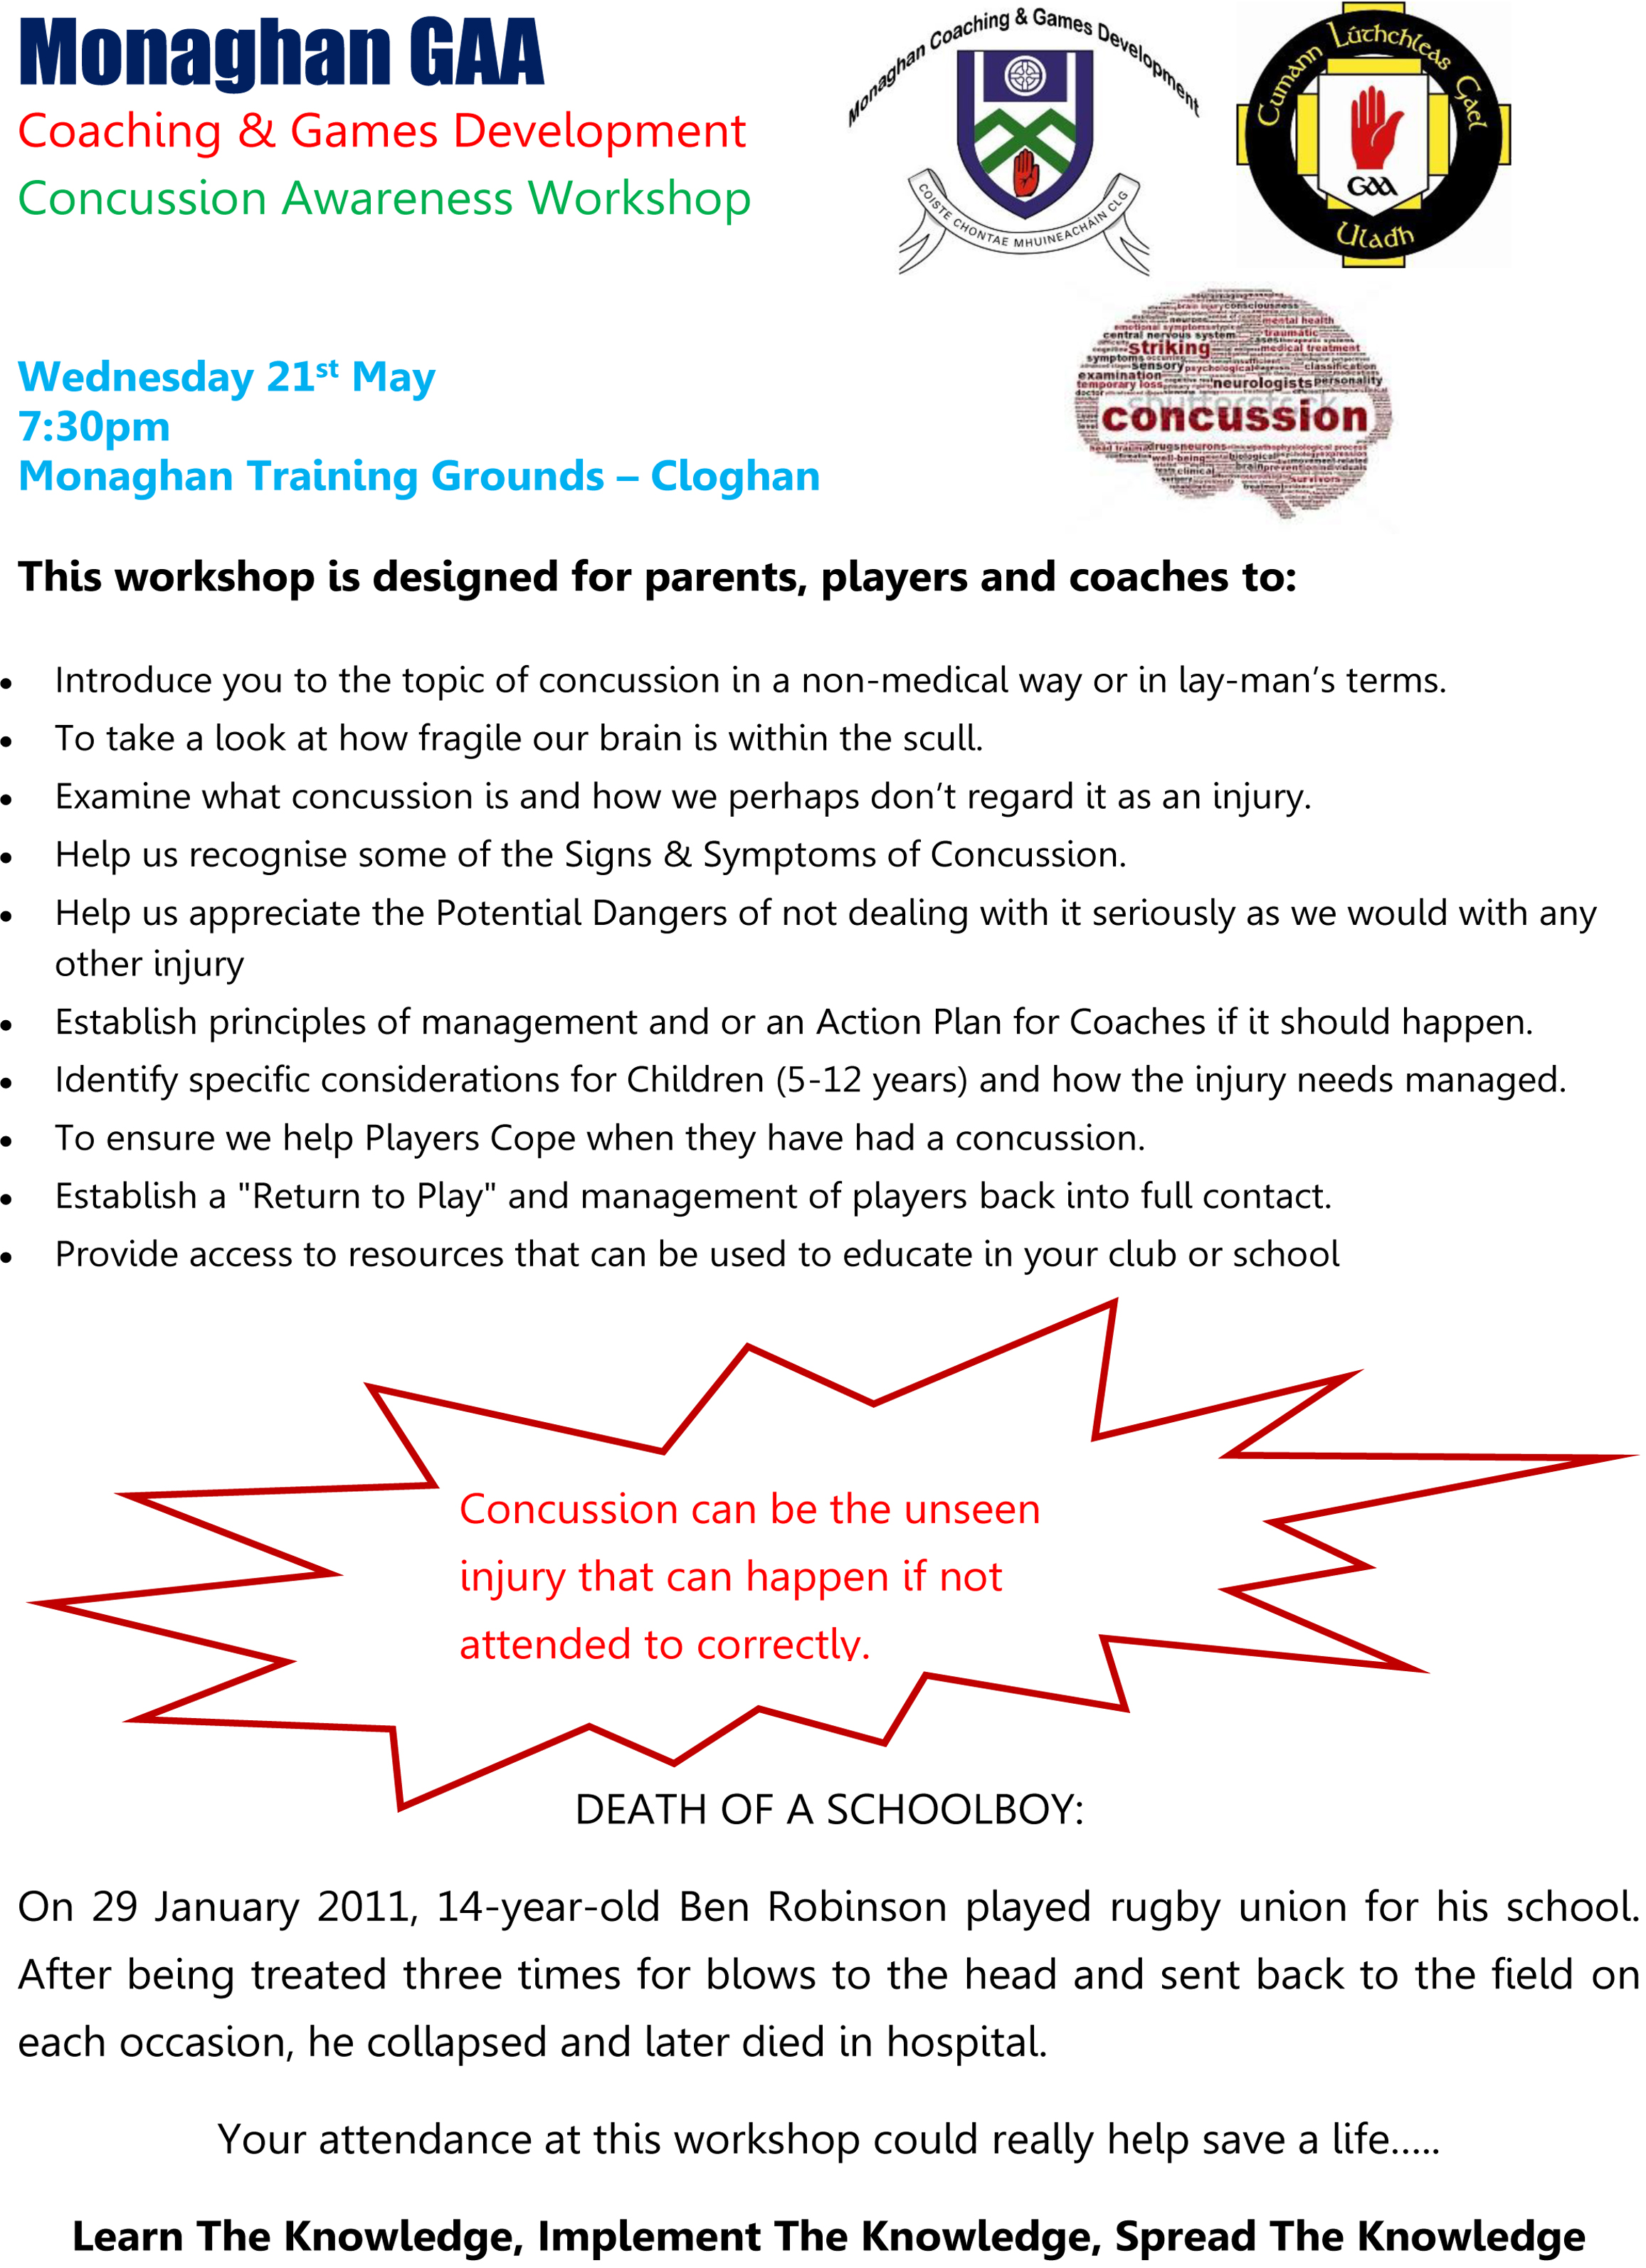 Concussion Awareness Workshop on Wed 21st May in Cloghan @ 7:30pm